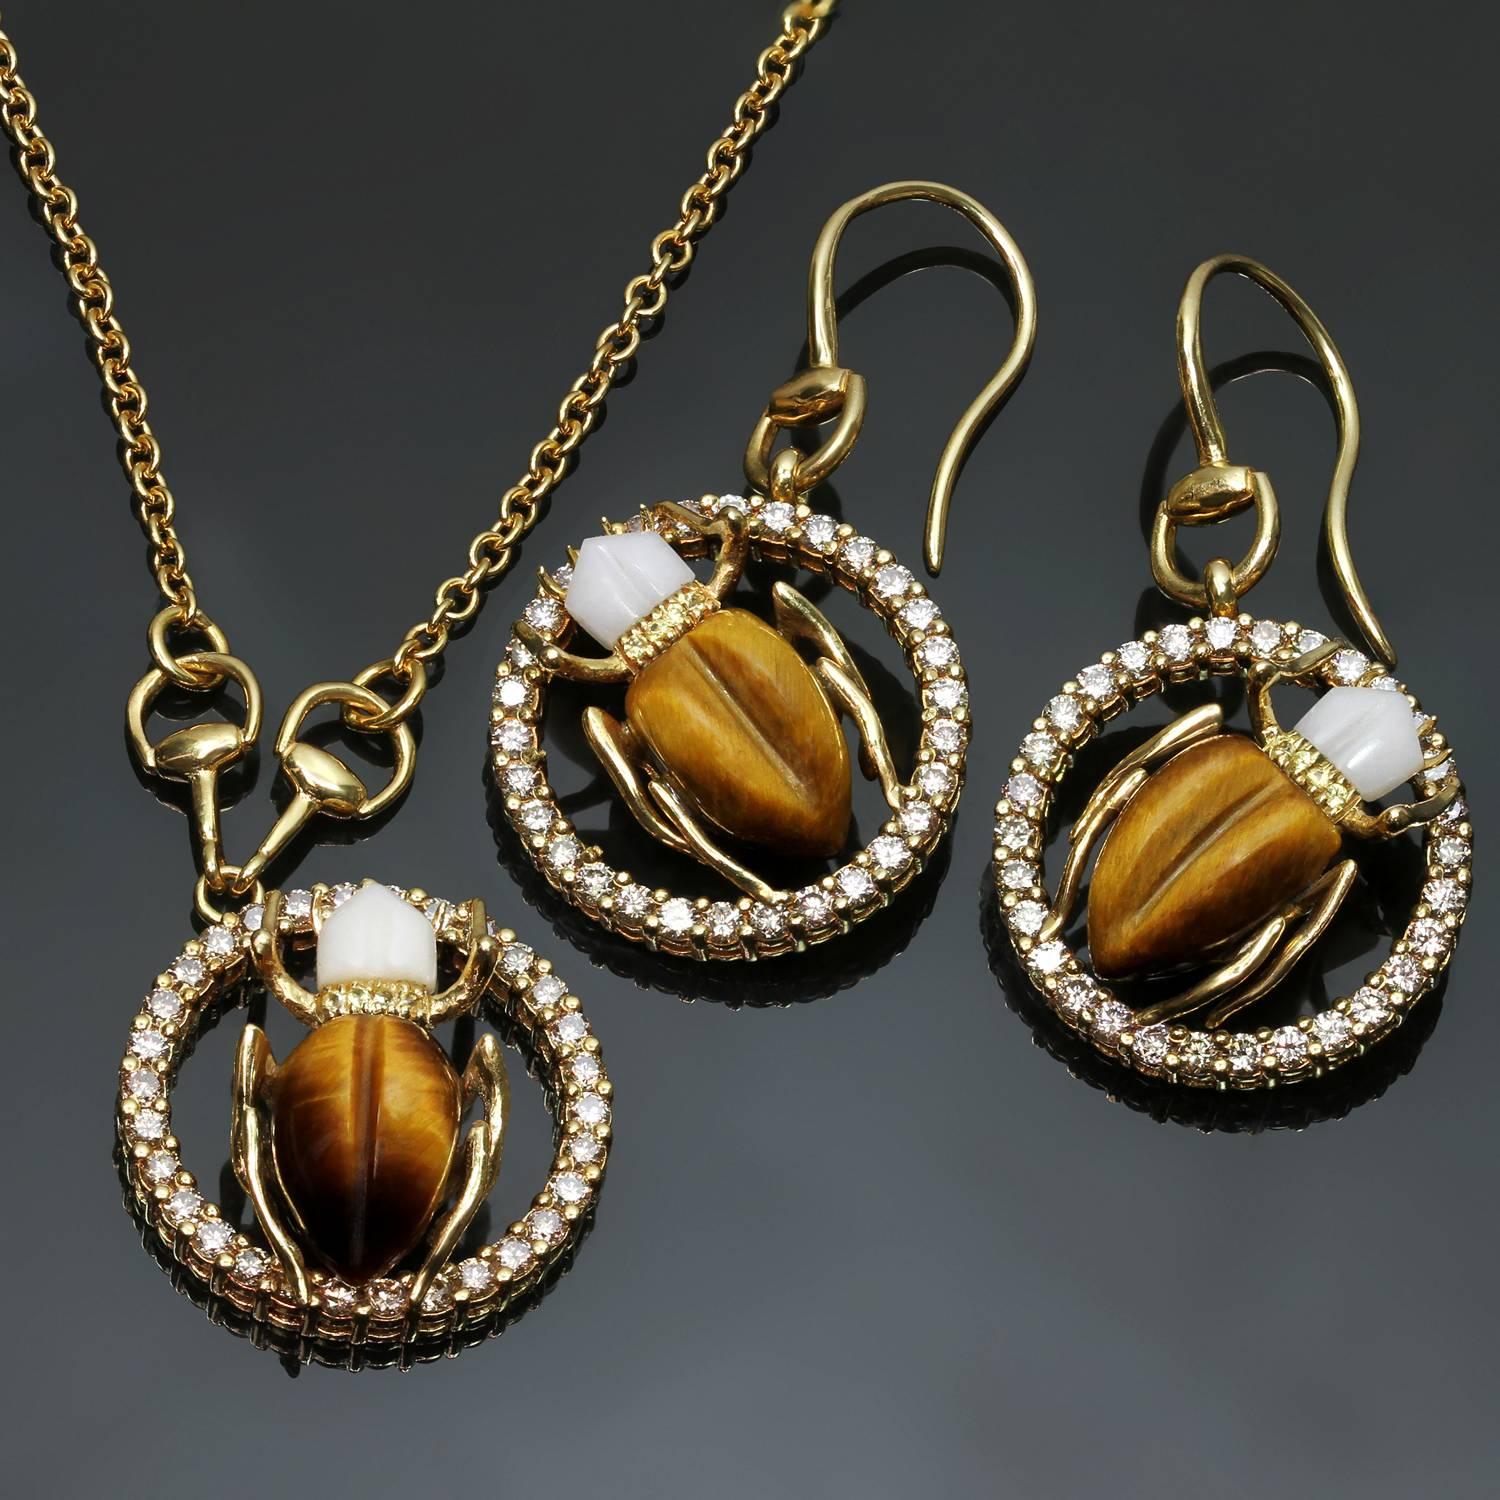 These lively and sparkling Gucci drop earrings & pendant necklace set feature a scarab beetle design crafted in 18k yellow gold and accented with champagne diamonds of an estimated 2.70 carats, yellow sapphire, white agate, and tiger's eye. Made in